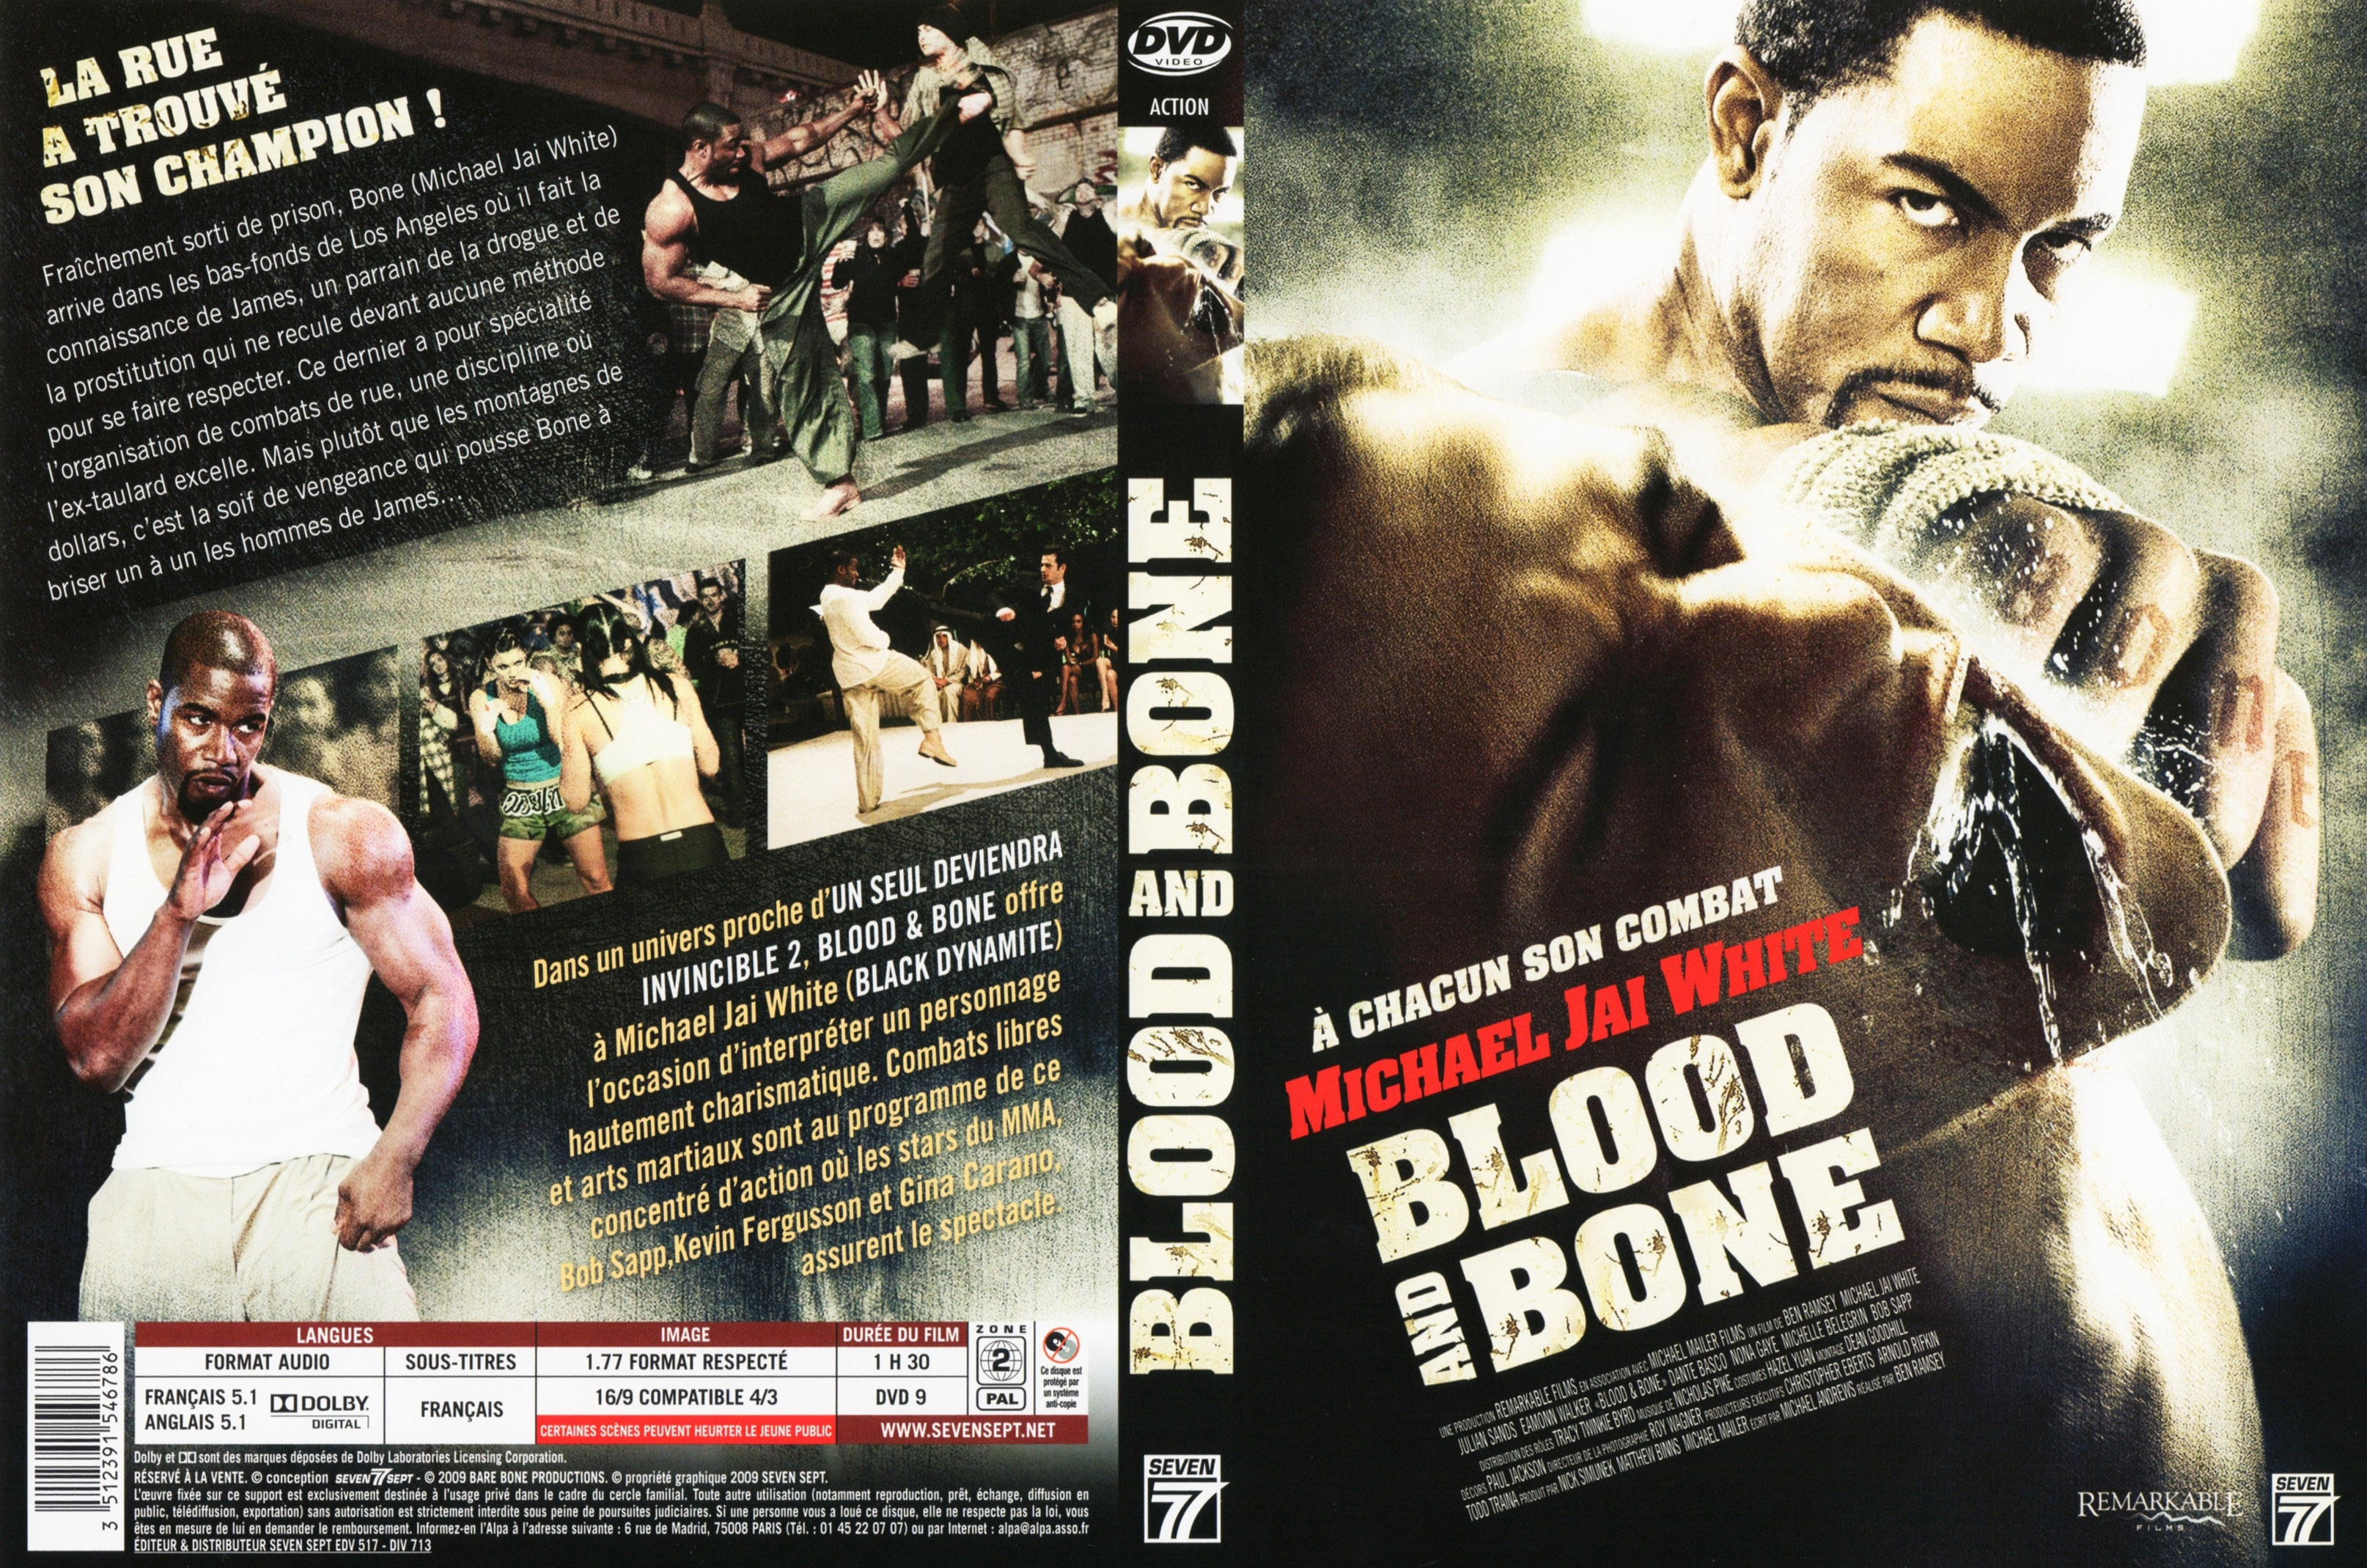 Jaquette DVD Blood and bone